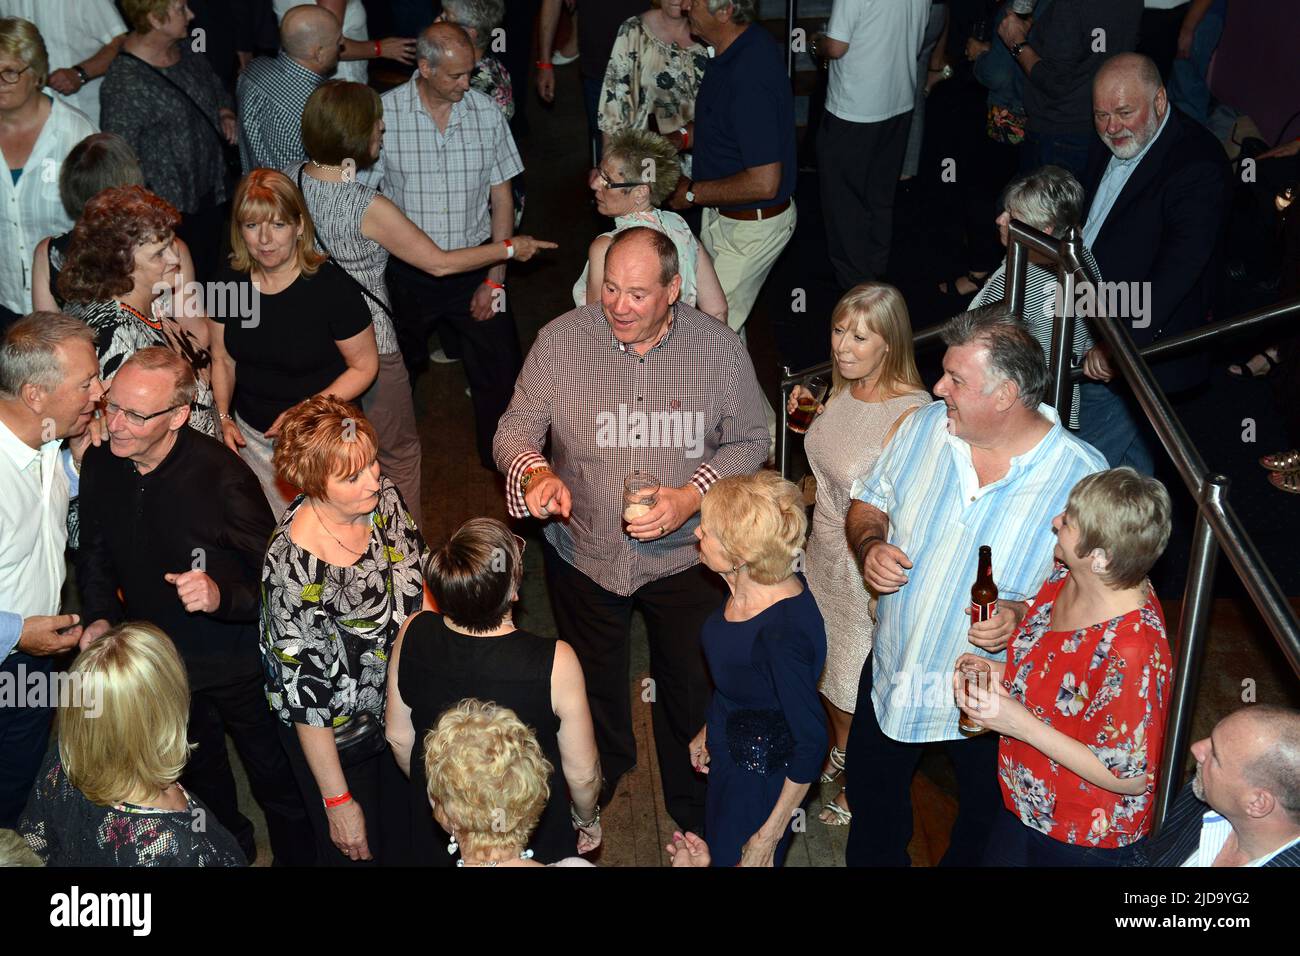 Reunion of Mods from the 1960s.dancing to Soul Music disco in 2015 Britain, Uk. Centre of pic two old friends suddenly recognise each other. Stock Photo